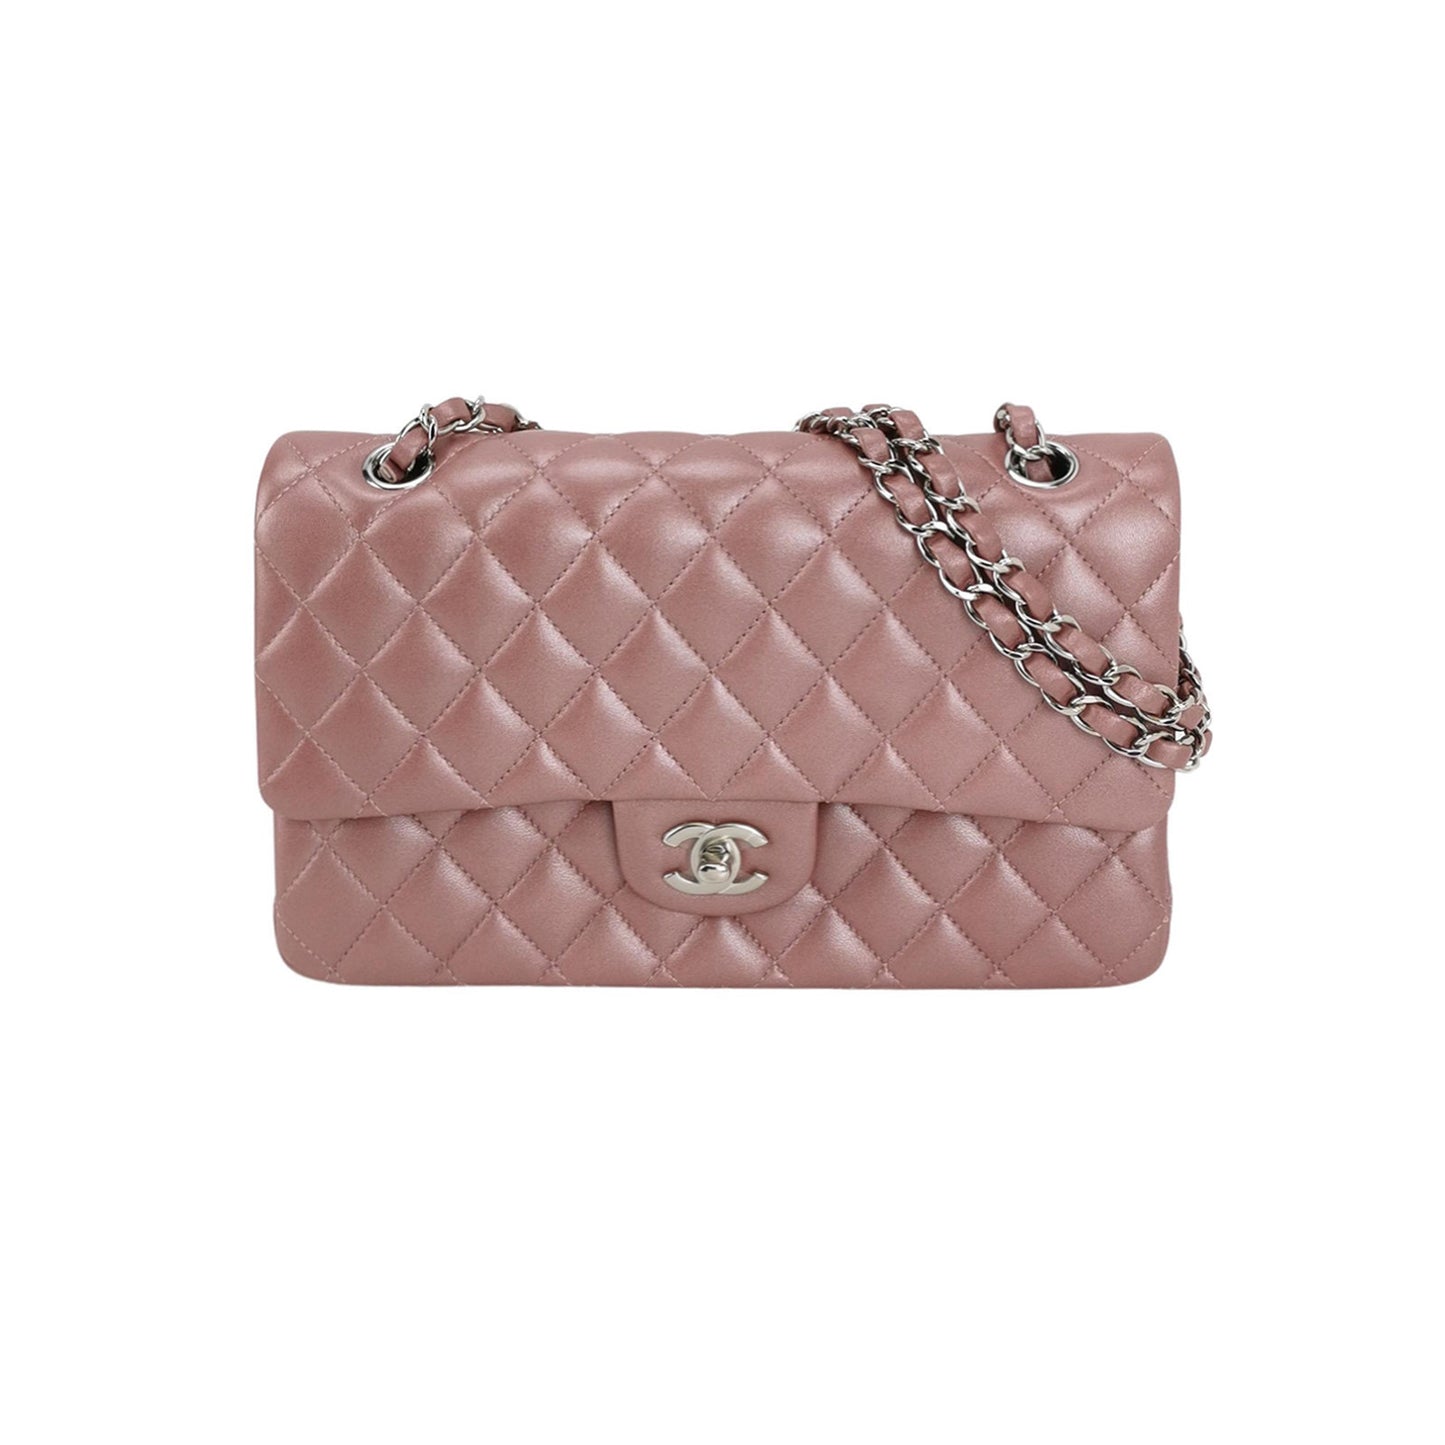 CHANEL Classic Medium Double Flap Iridescent Mauve Lambskin with silver hardware